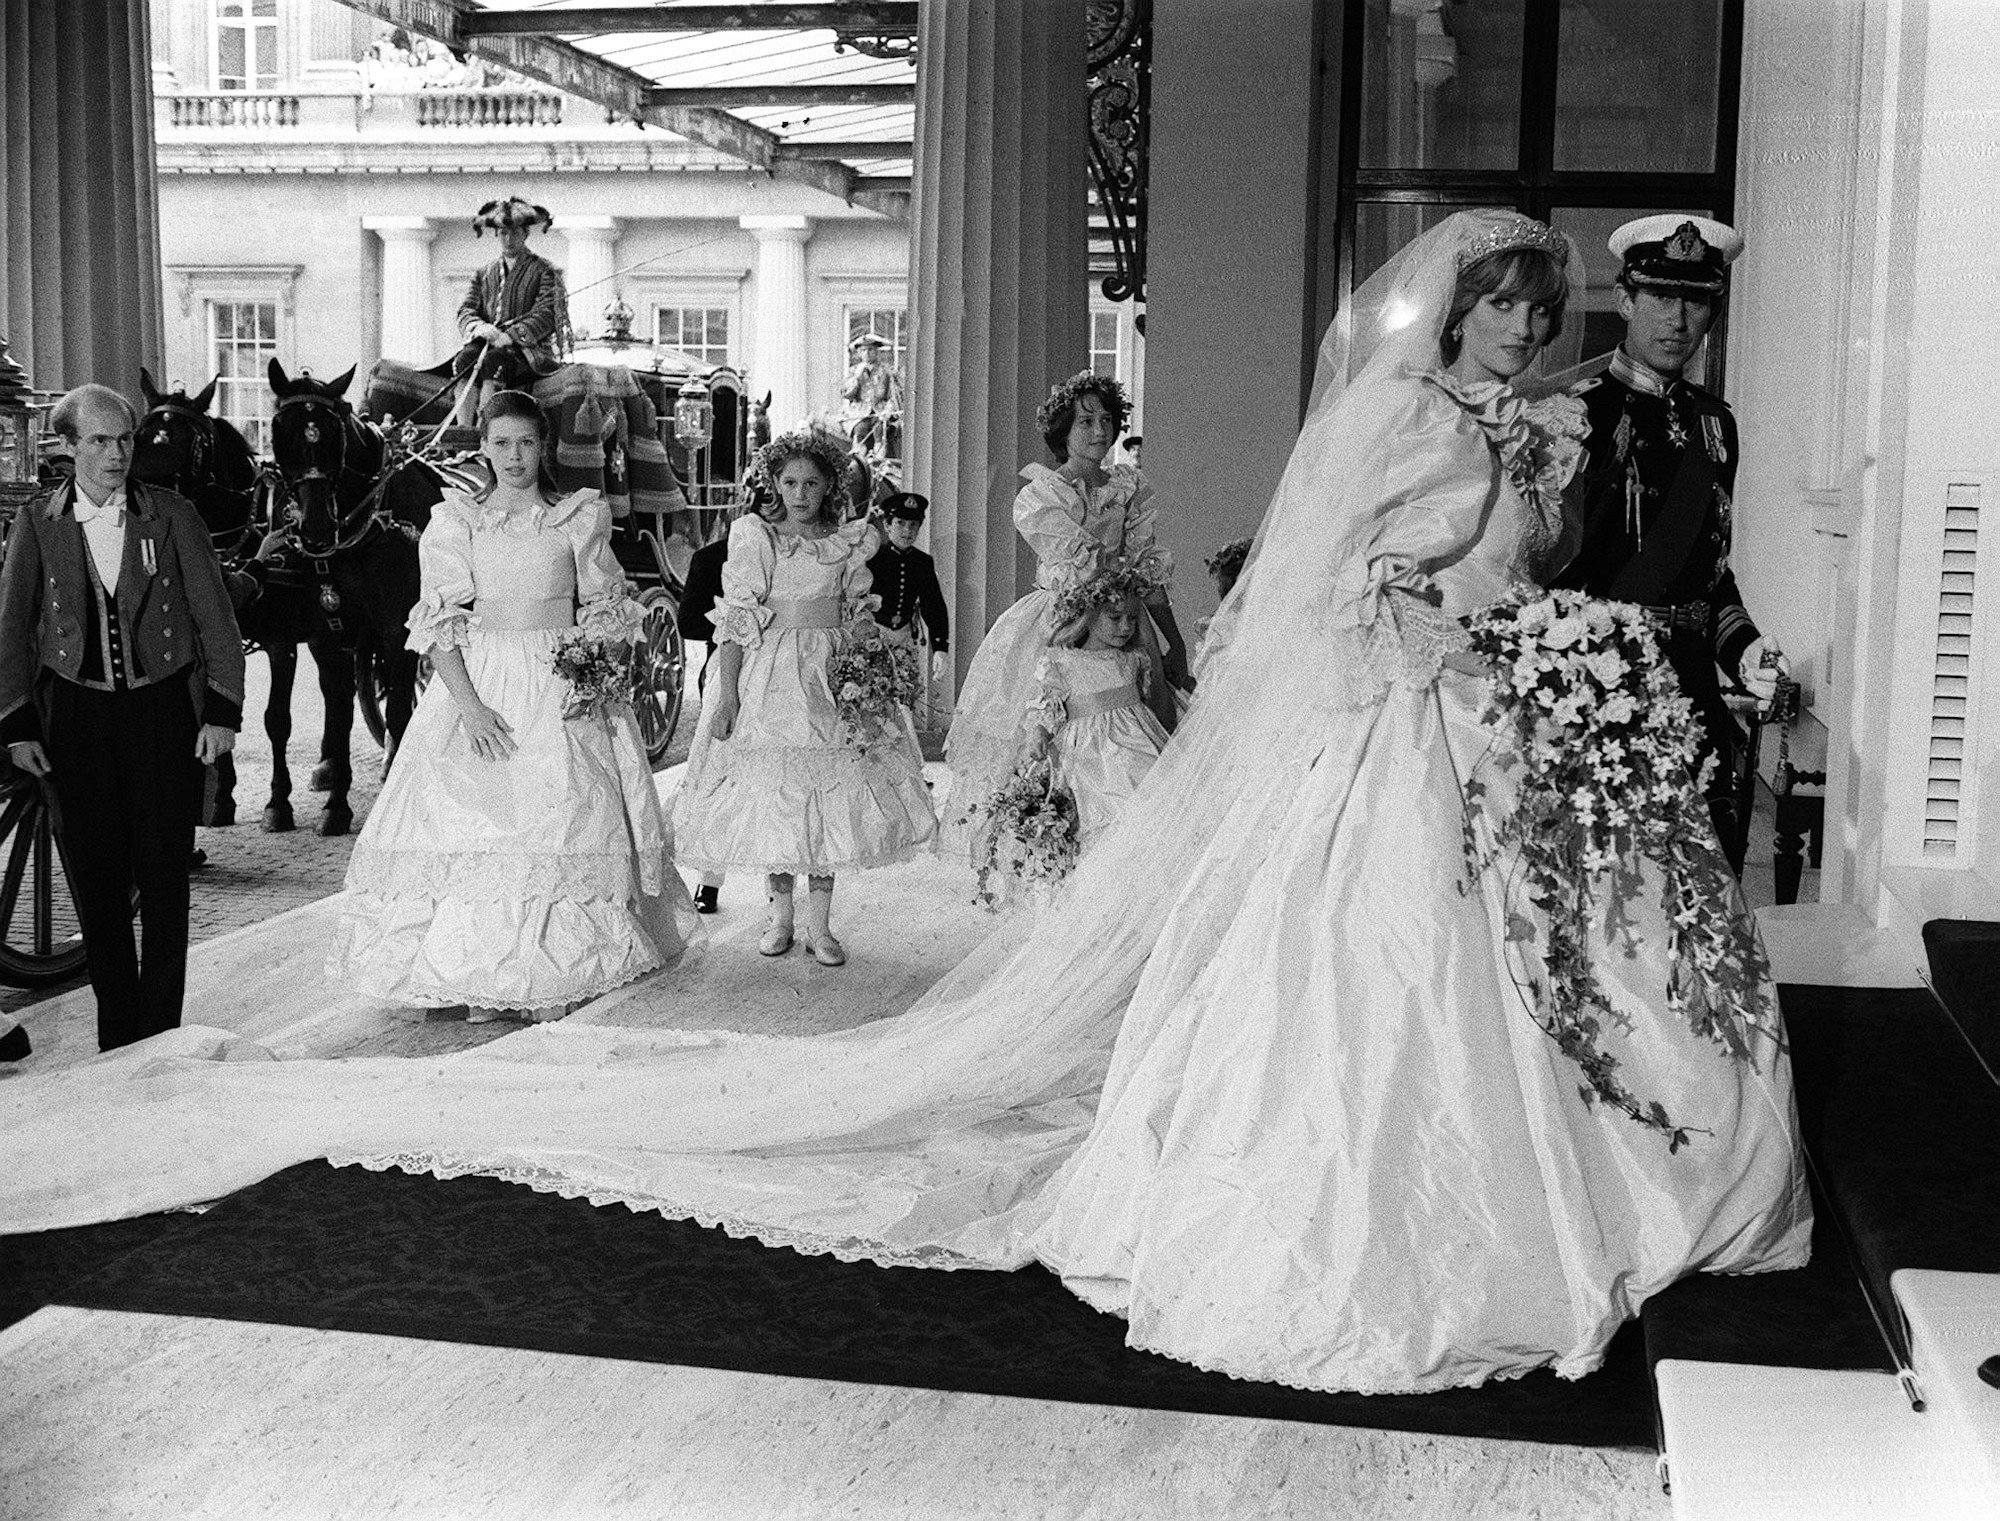 Princess Diana in one of the most iconic royal family looks, her 1981 wedding dress, walking with Prince Charles, in black and white. It's one of the royal family's best looks.